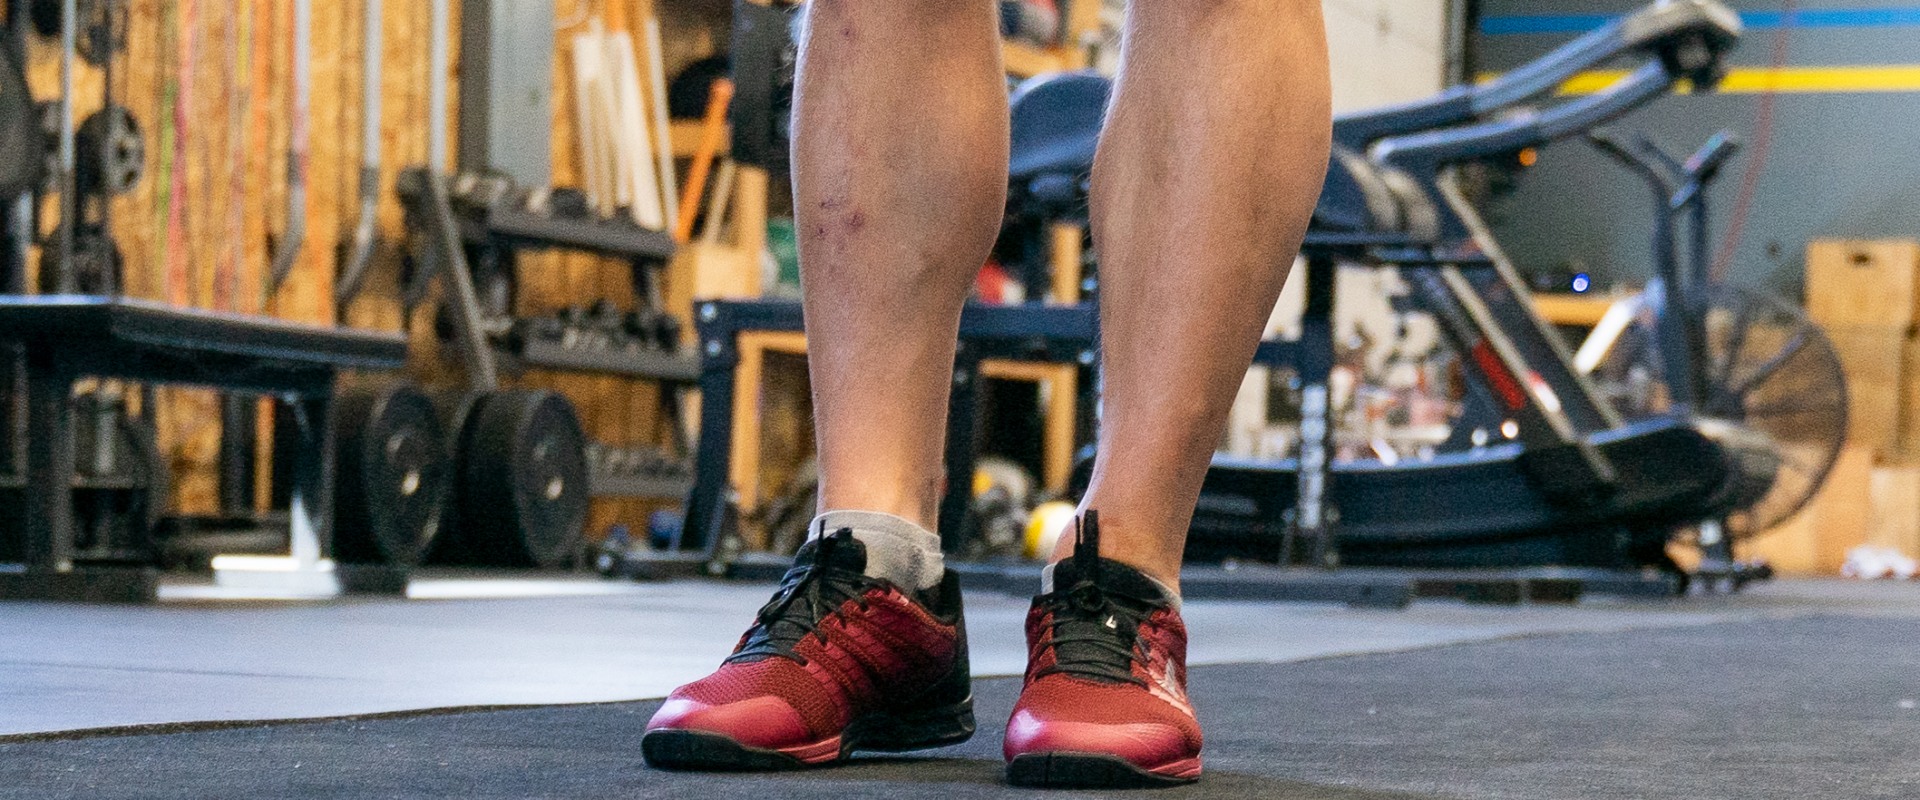 Everything You Need to Know About Crossfit Shoes and Apparel